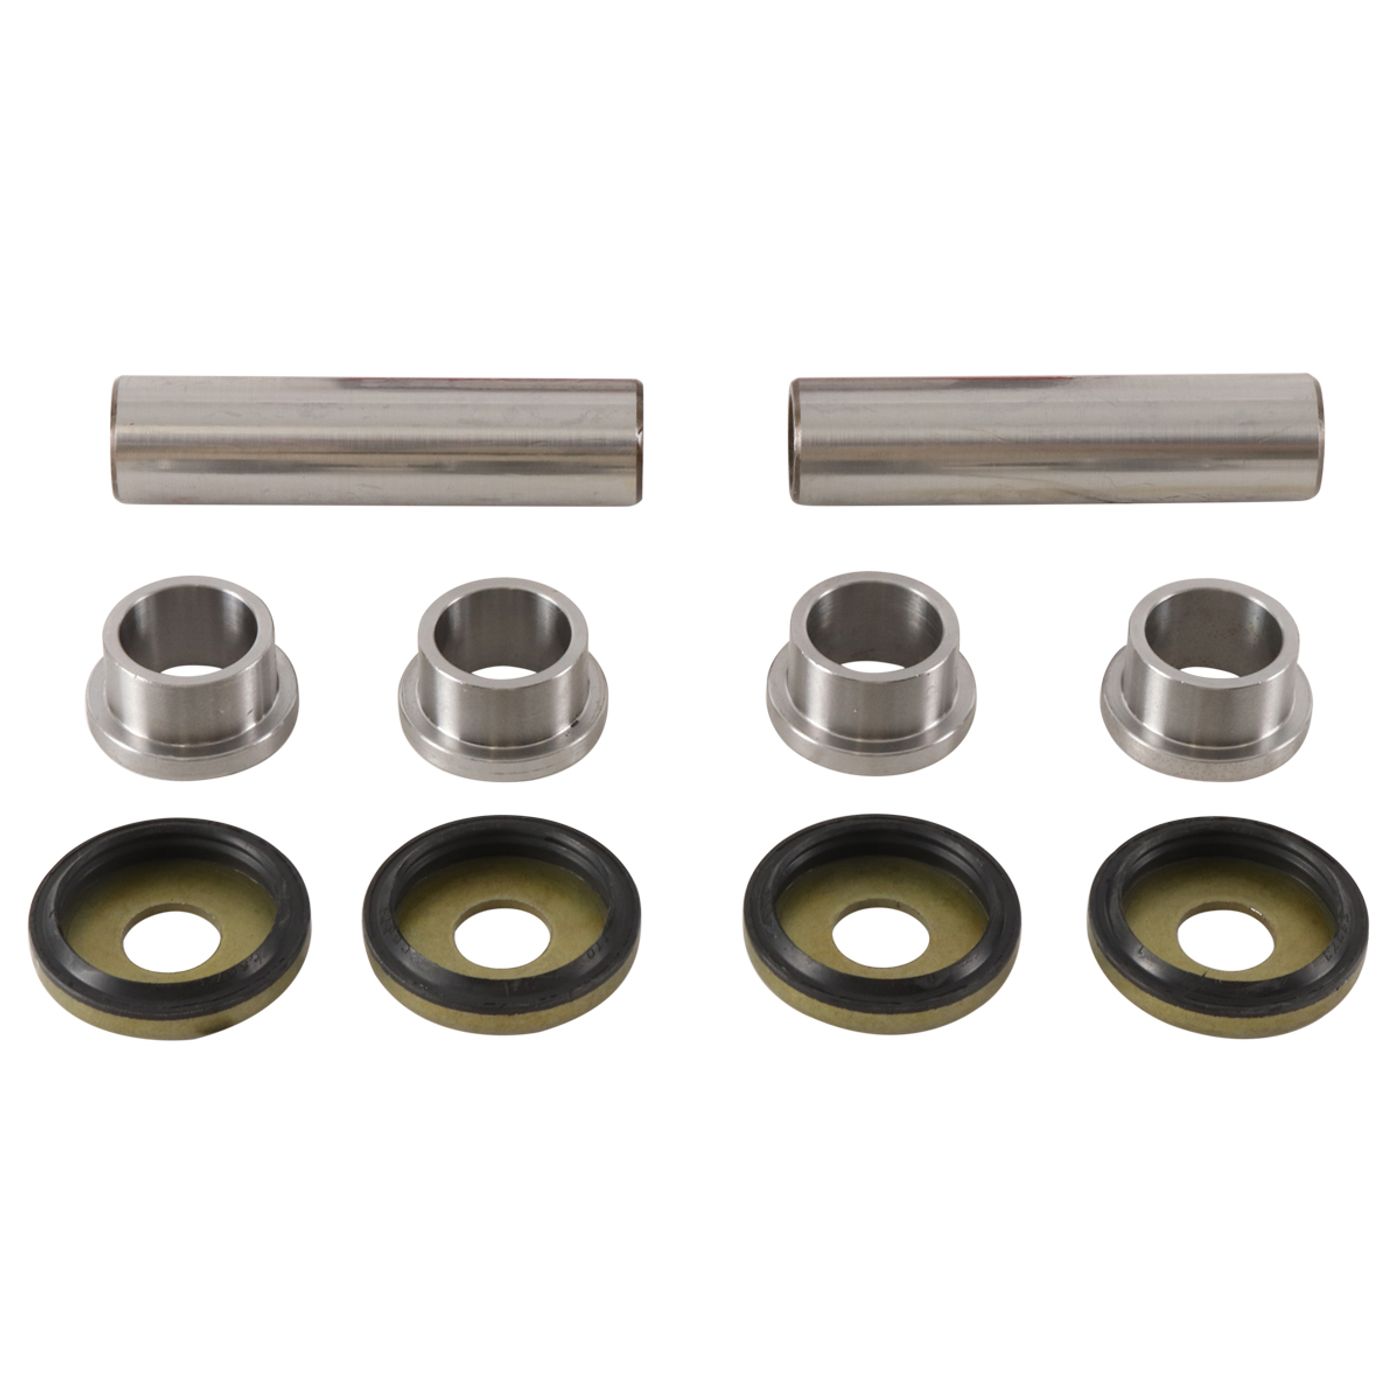 Wrp Rear Ind. Suspension Kits - WRP501173-K image